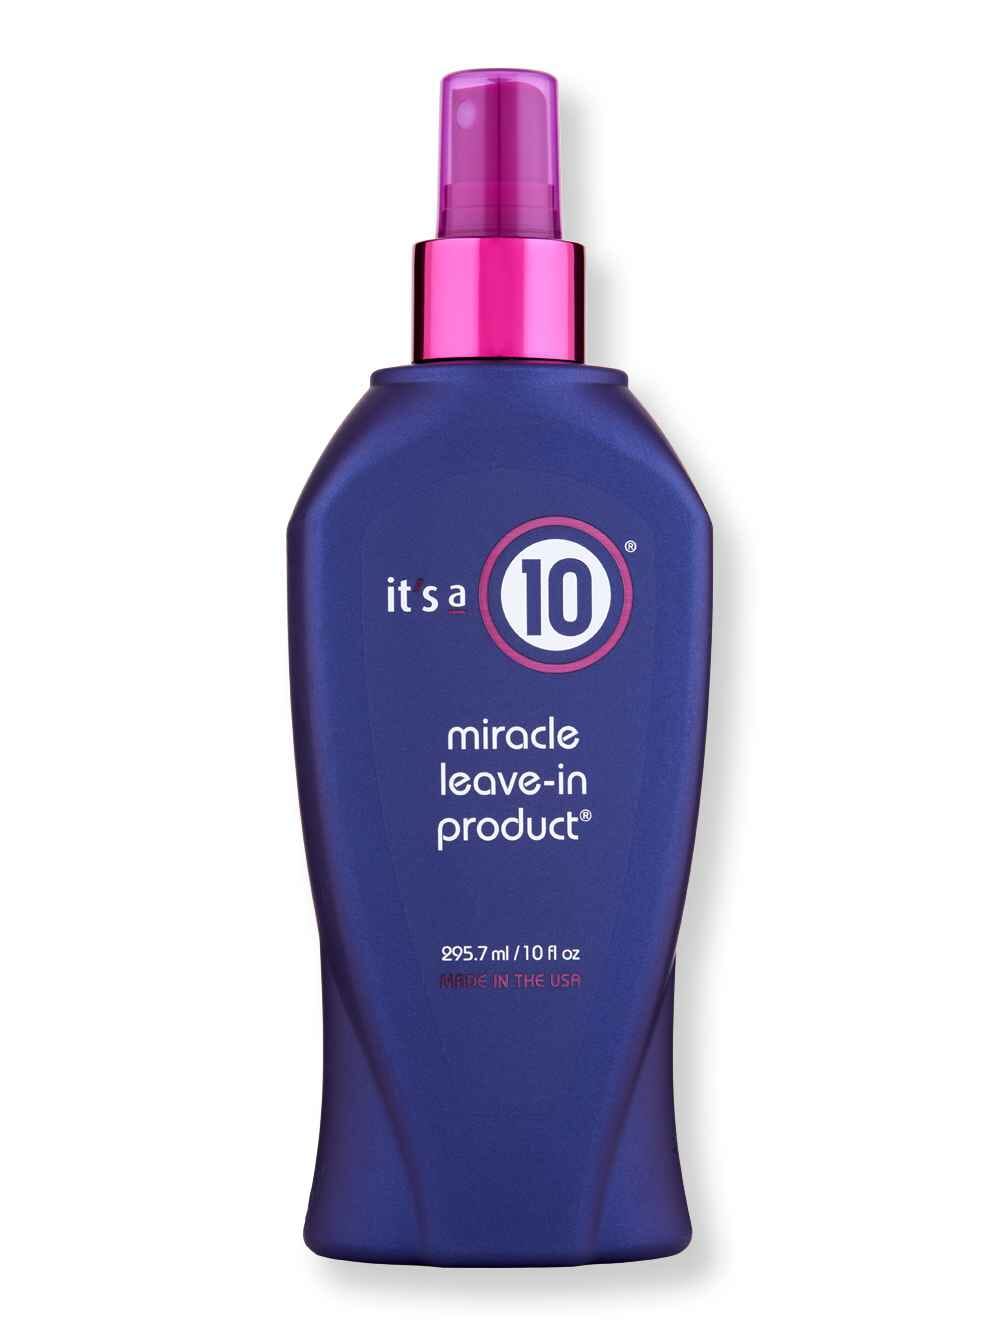 It's A 10 It's A 10 Miracle Leave-In Product 10 oz295.7 ml Styling Treatments 